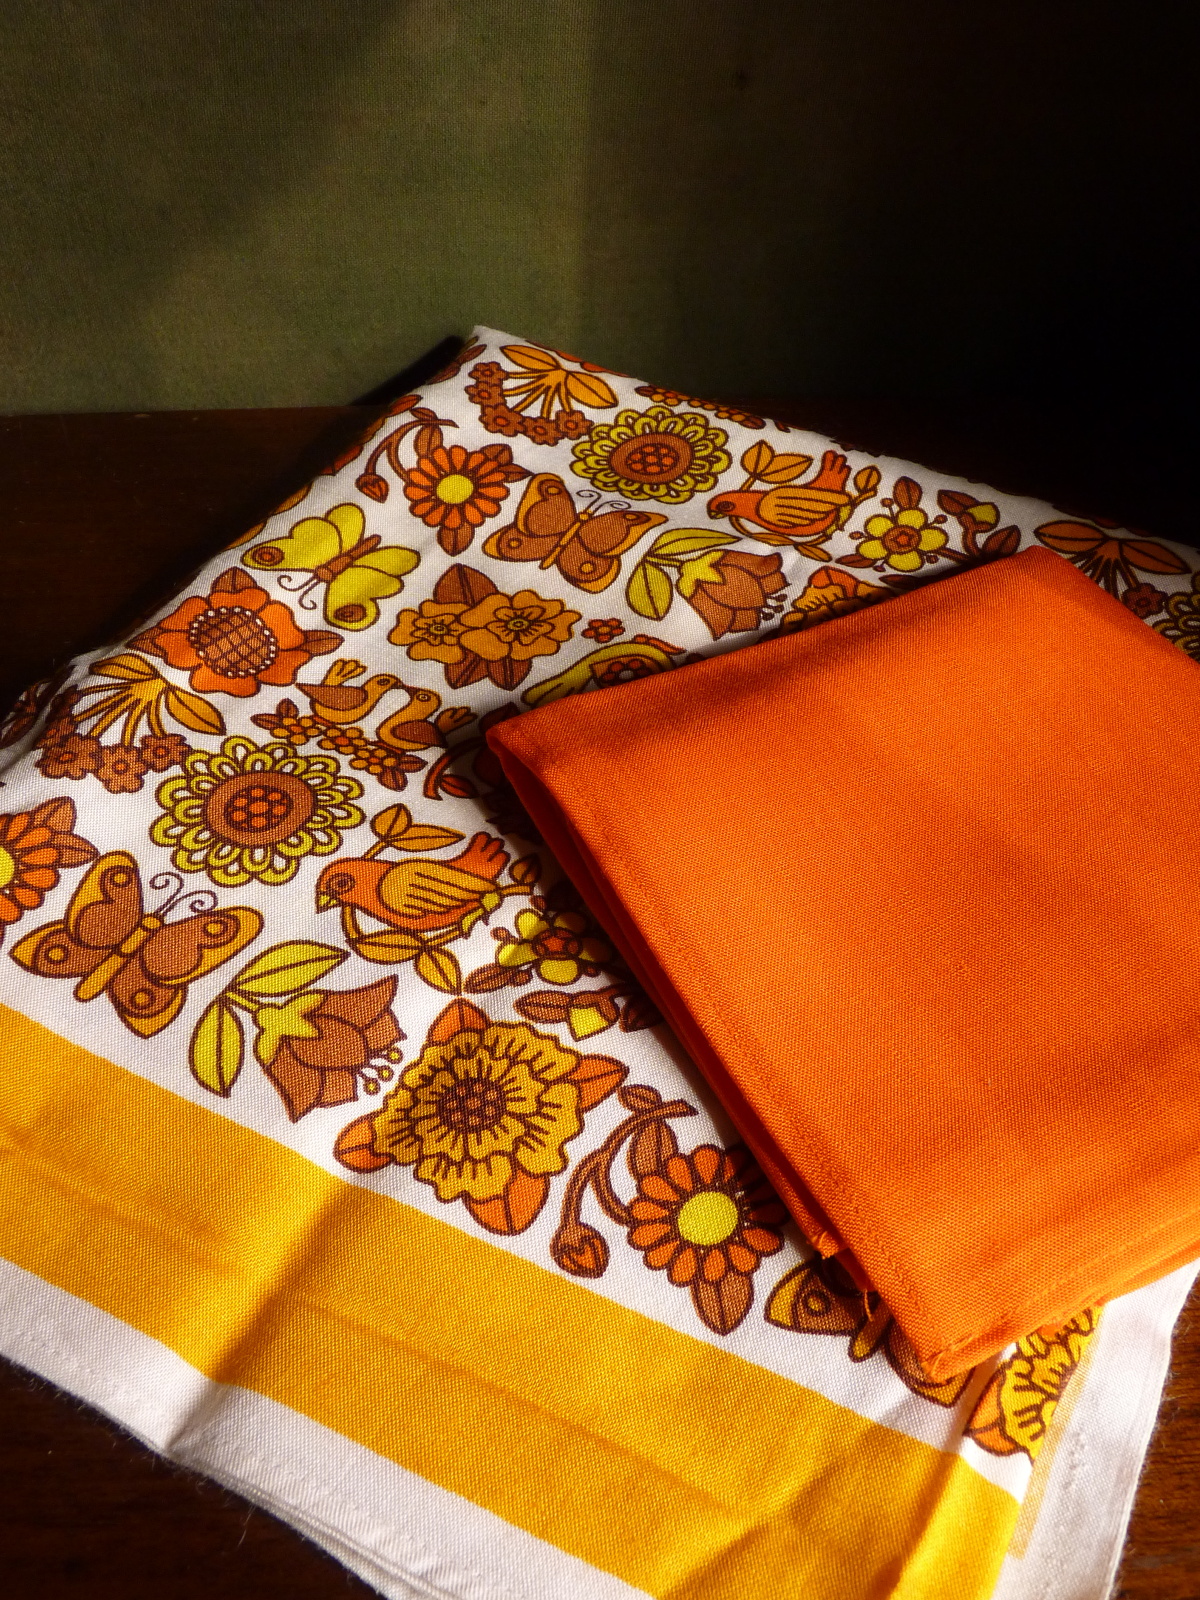 Orange and Brown Tablecloth with Flowers, Birds and Butterflies ...